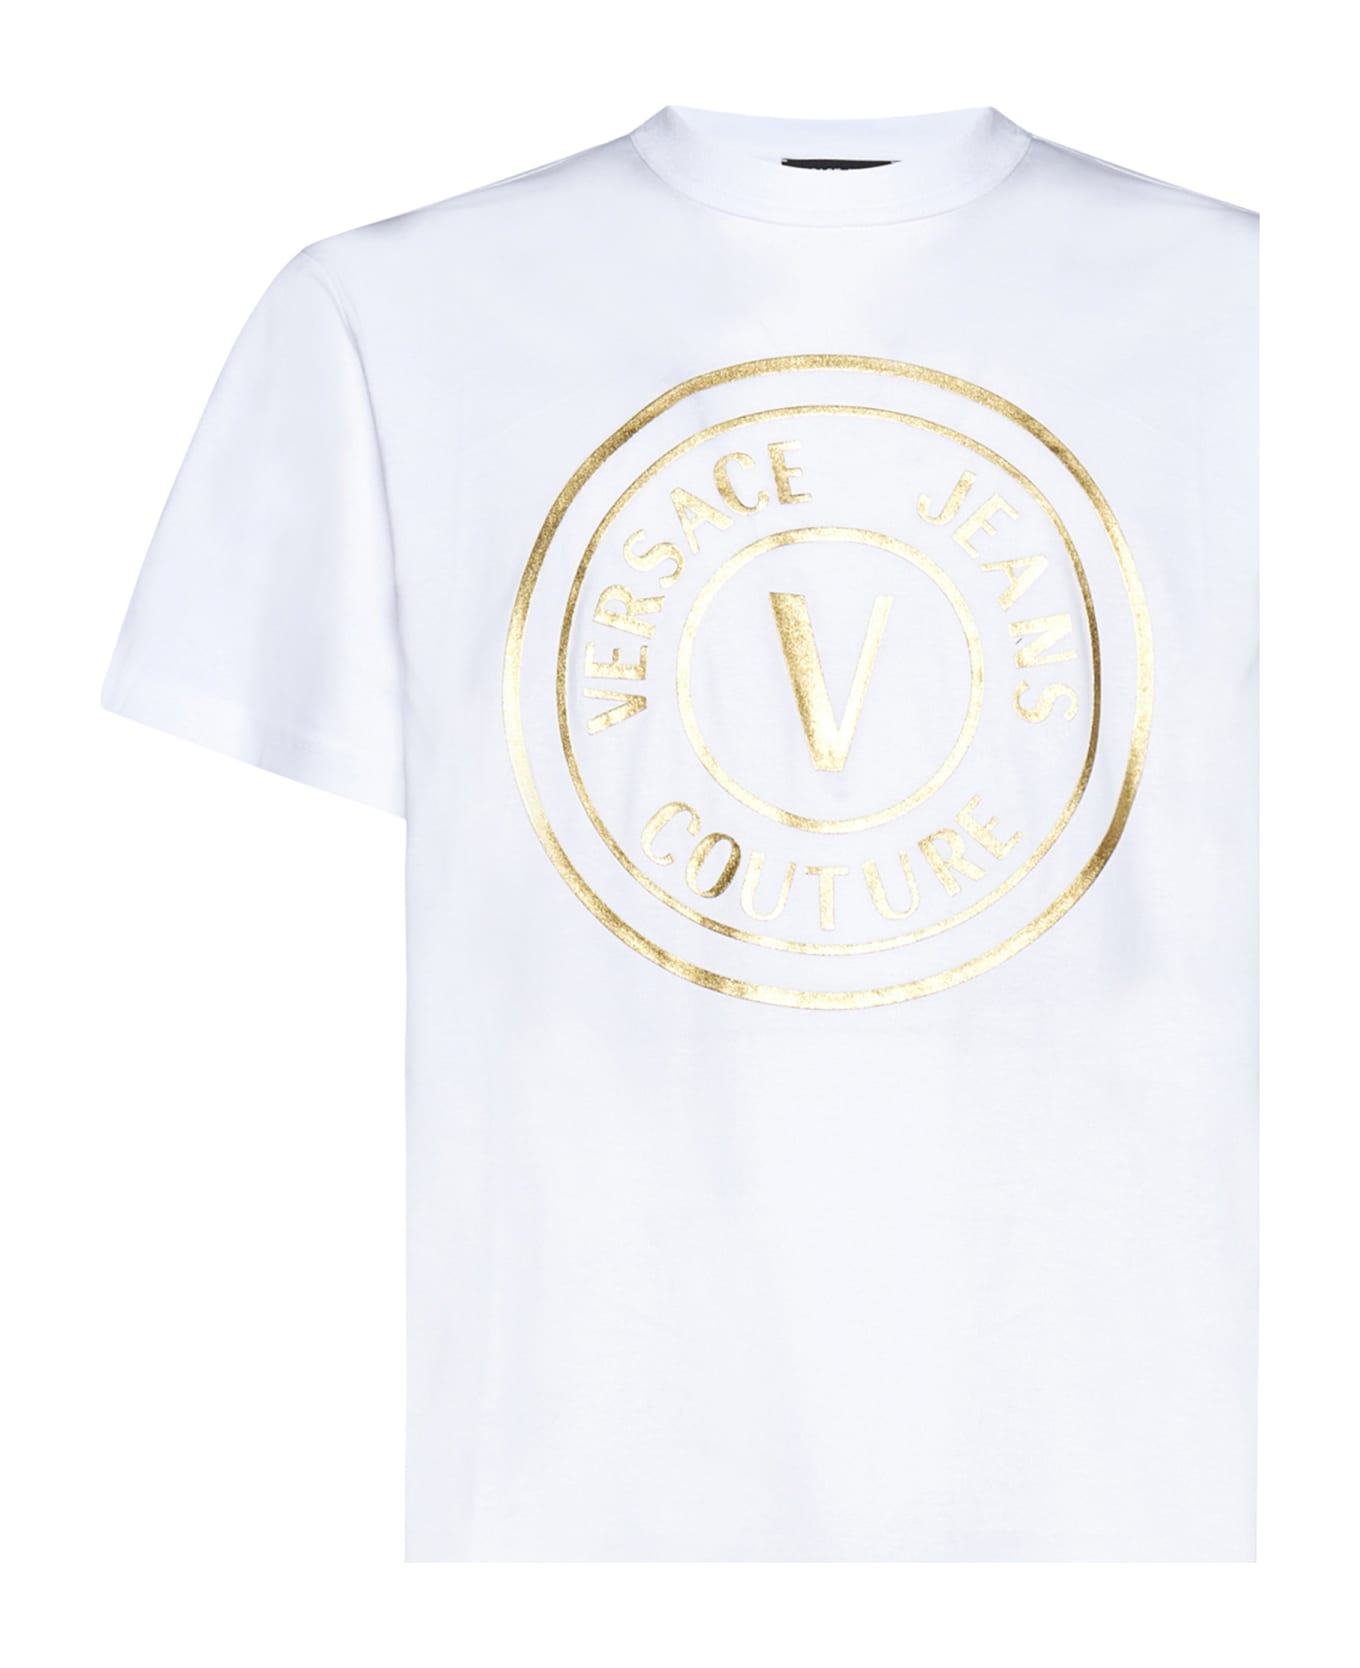 Versace Jeans Couture V Emblem T-shirt - White gold シャツ